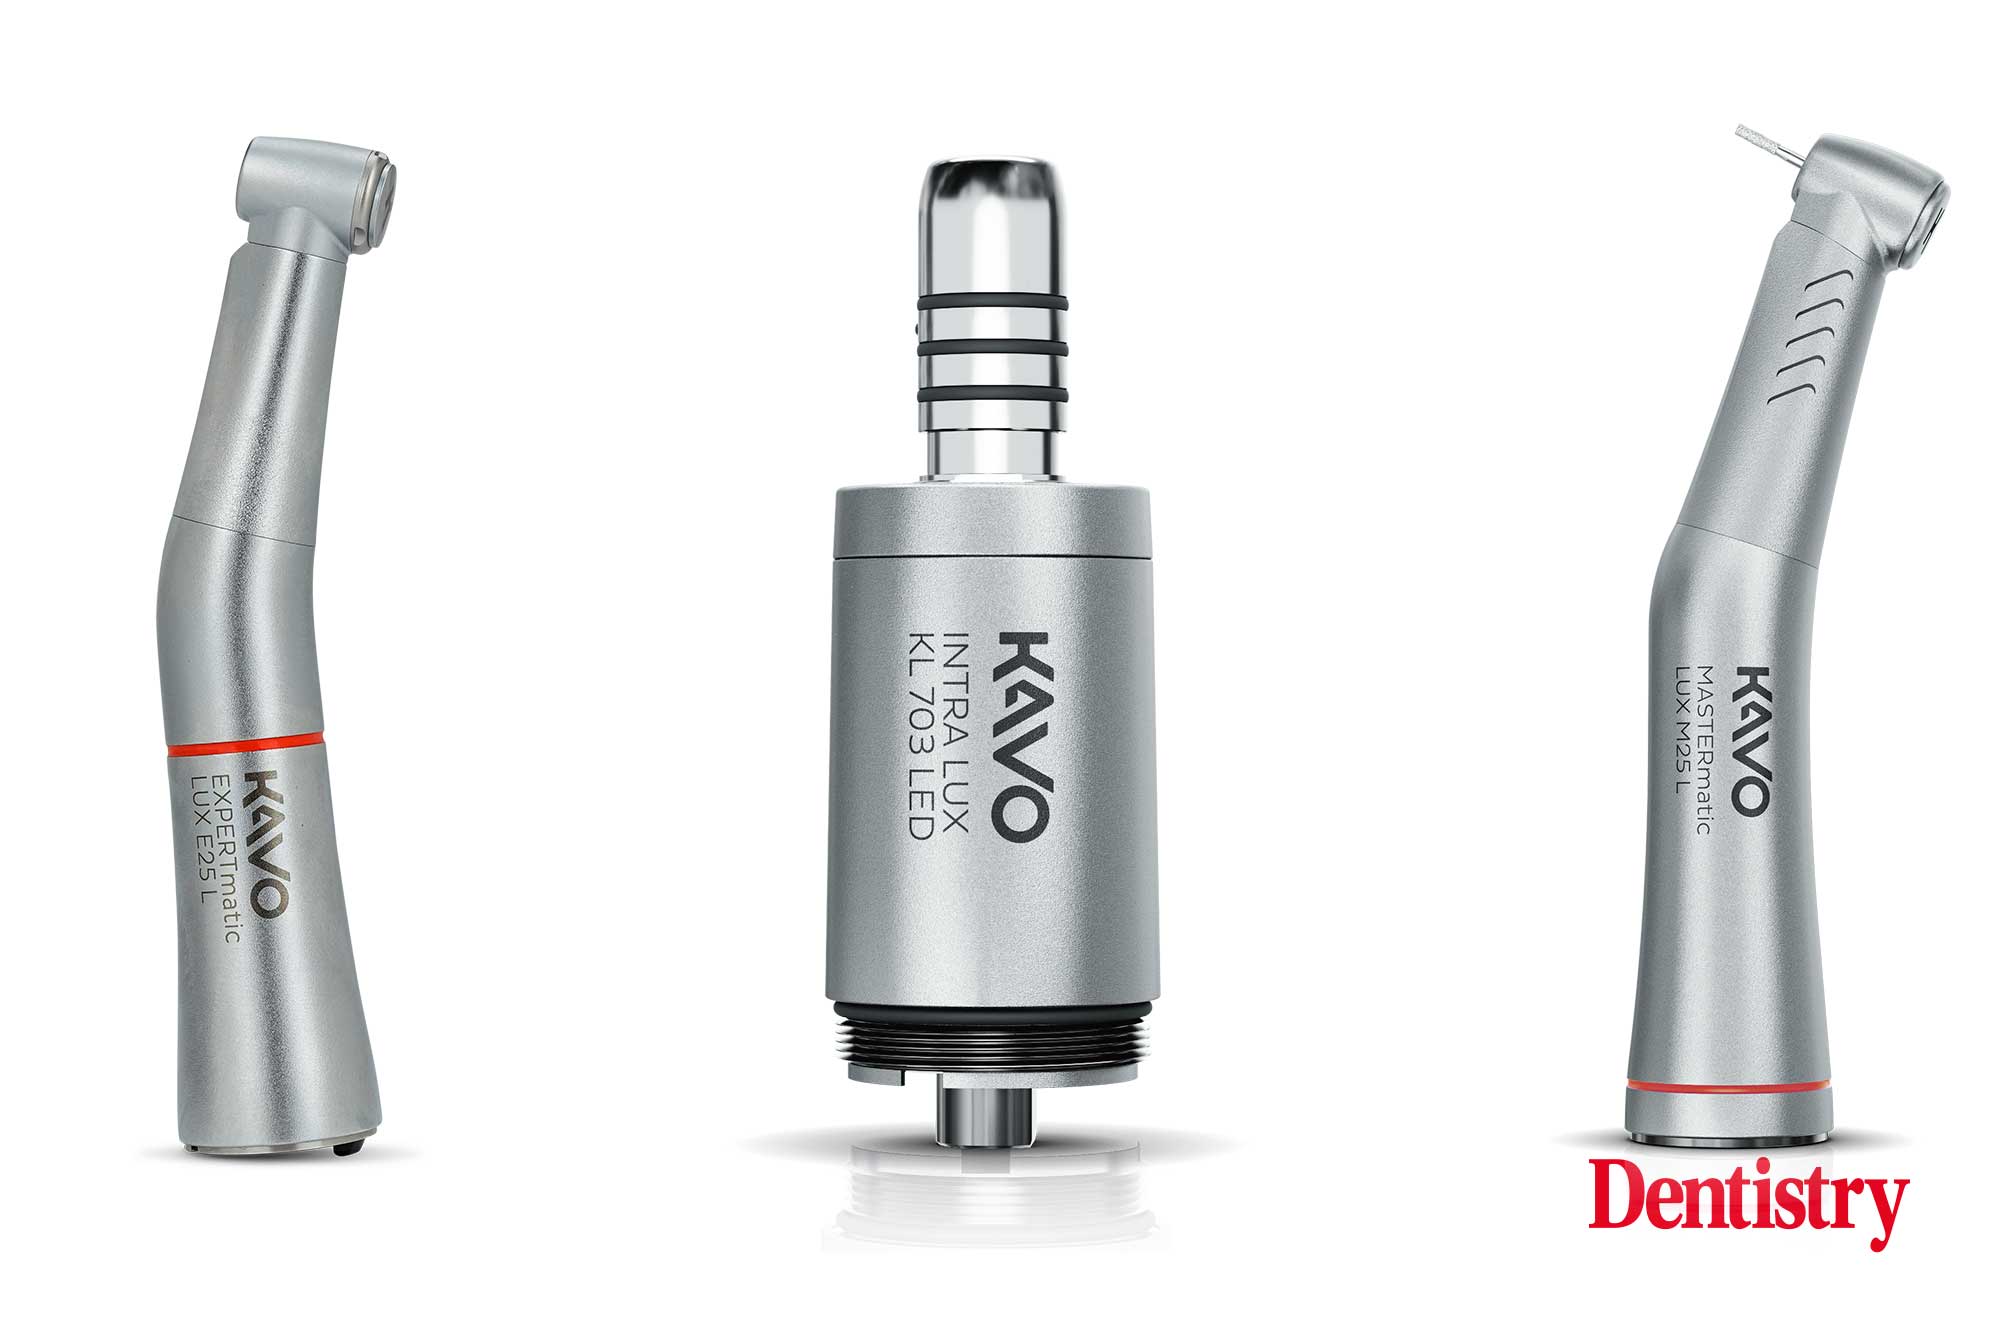 The speed increasing handpiece – a small yet mighty addition to your armoury